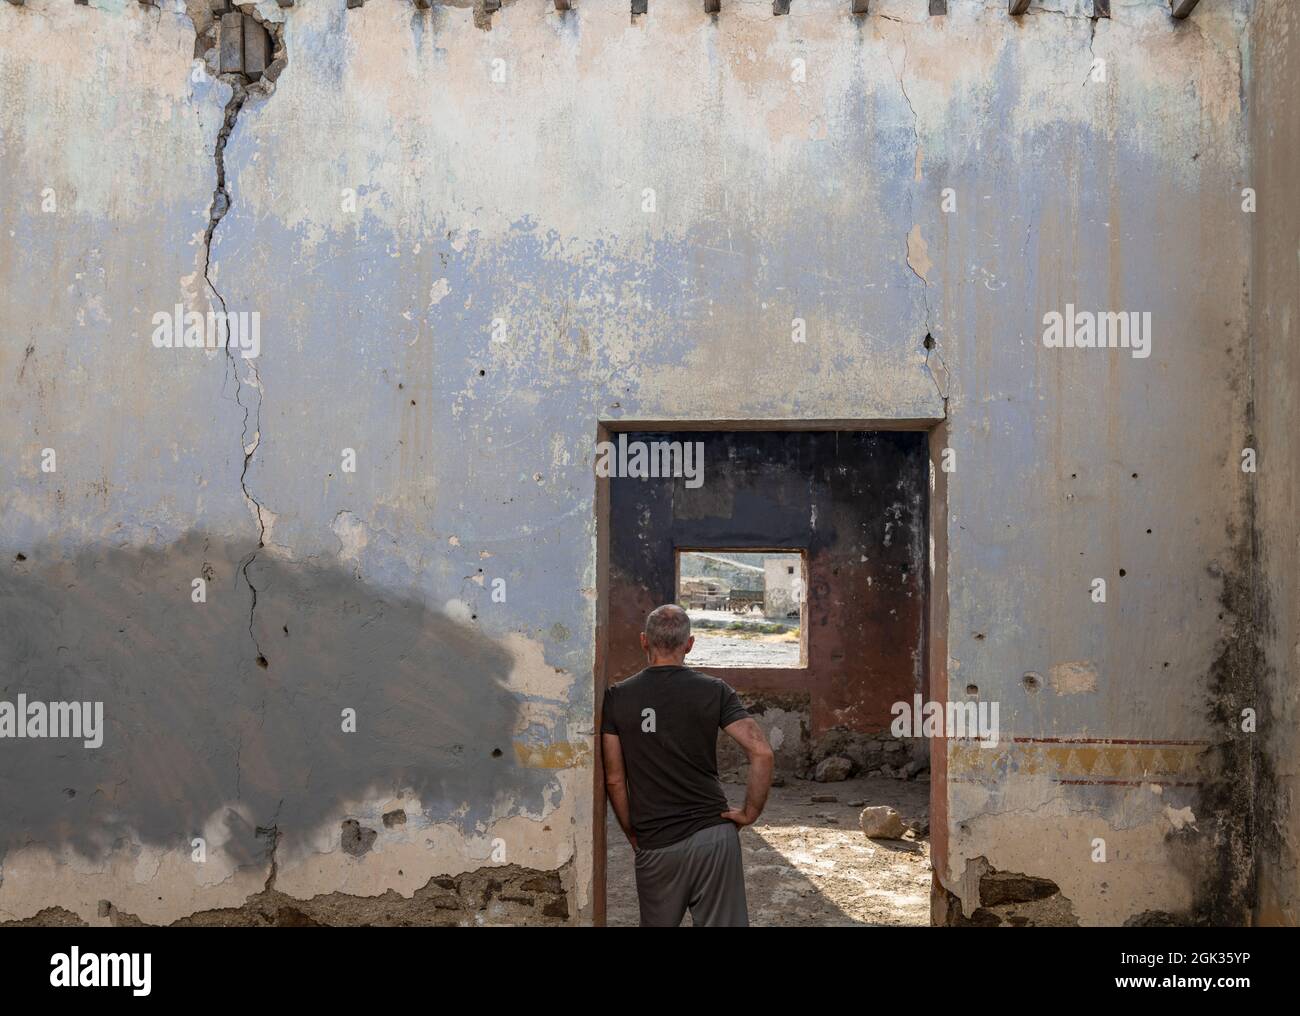 Rear view of adult man standing in doorway of an abandoned house Stock Photo